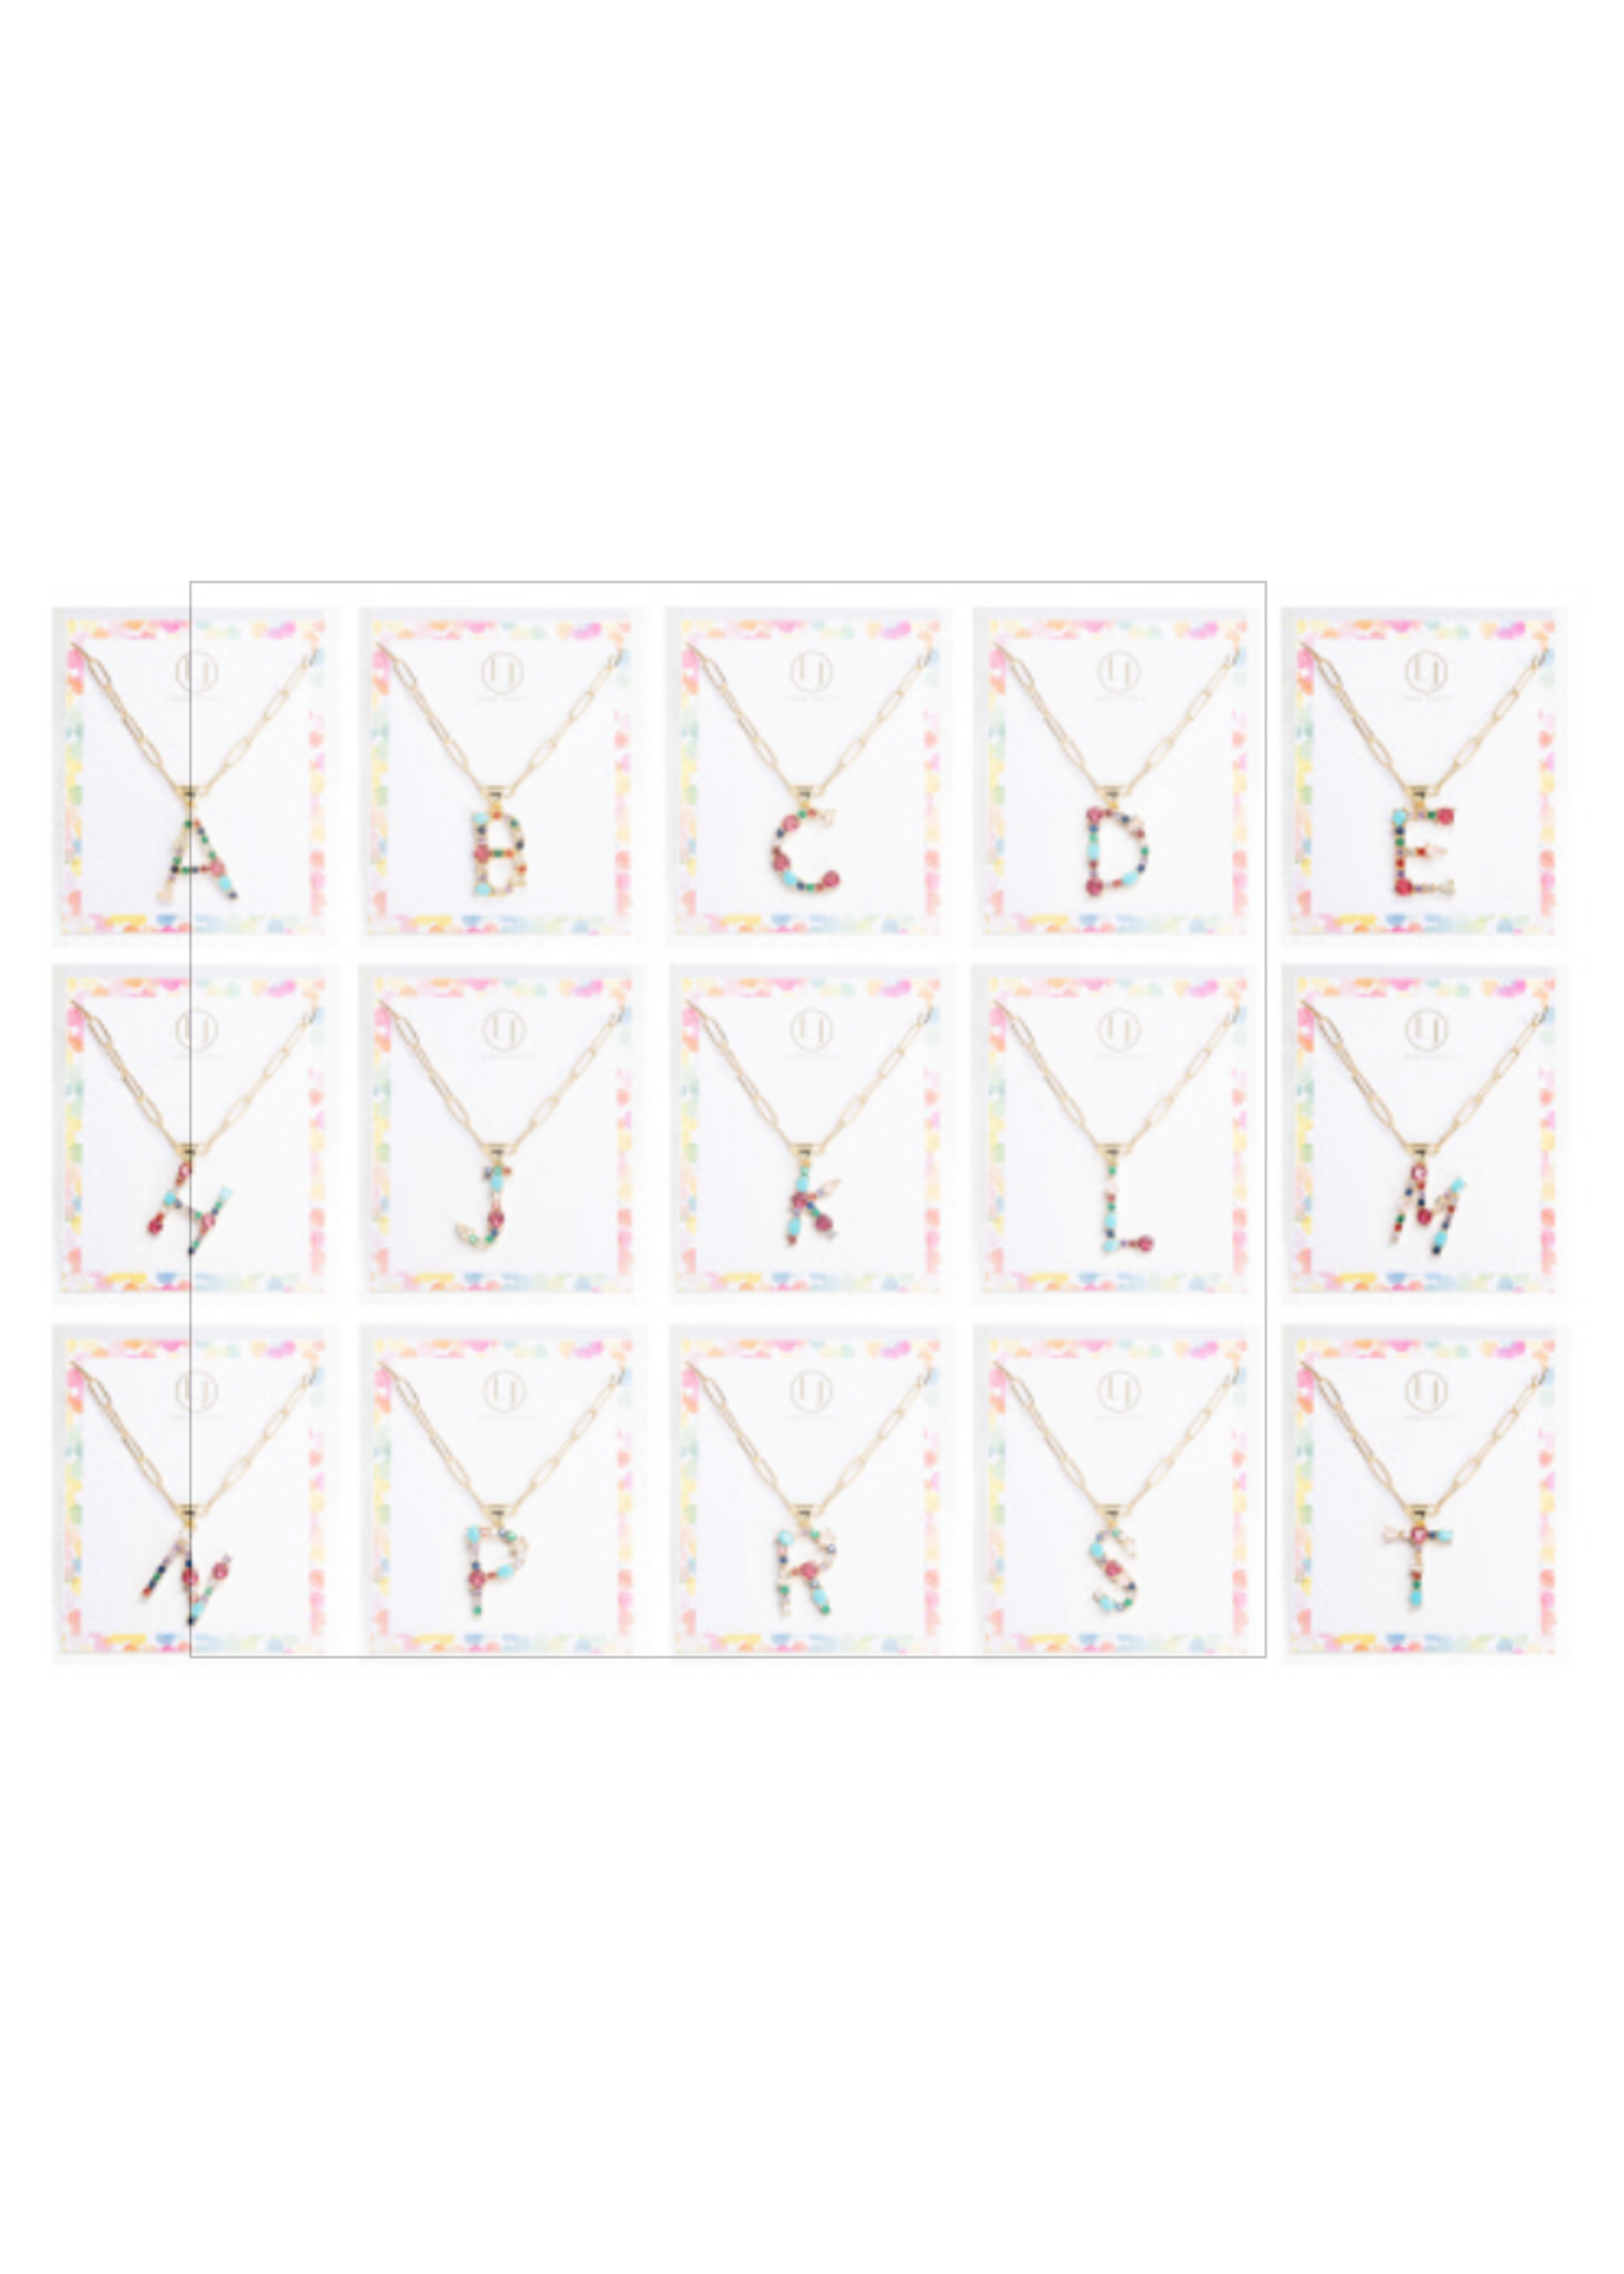 laura janelle Initial Necklace